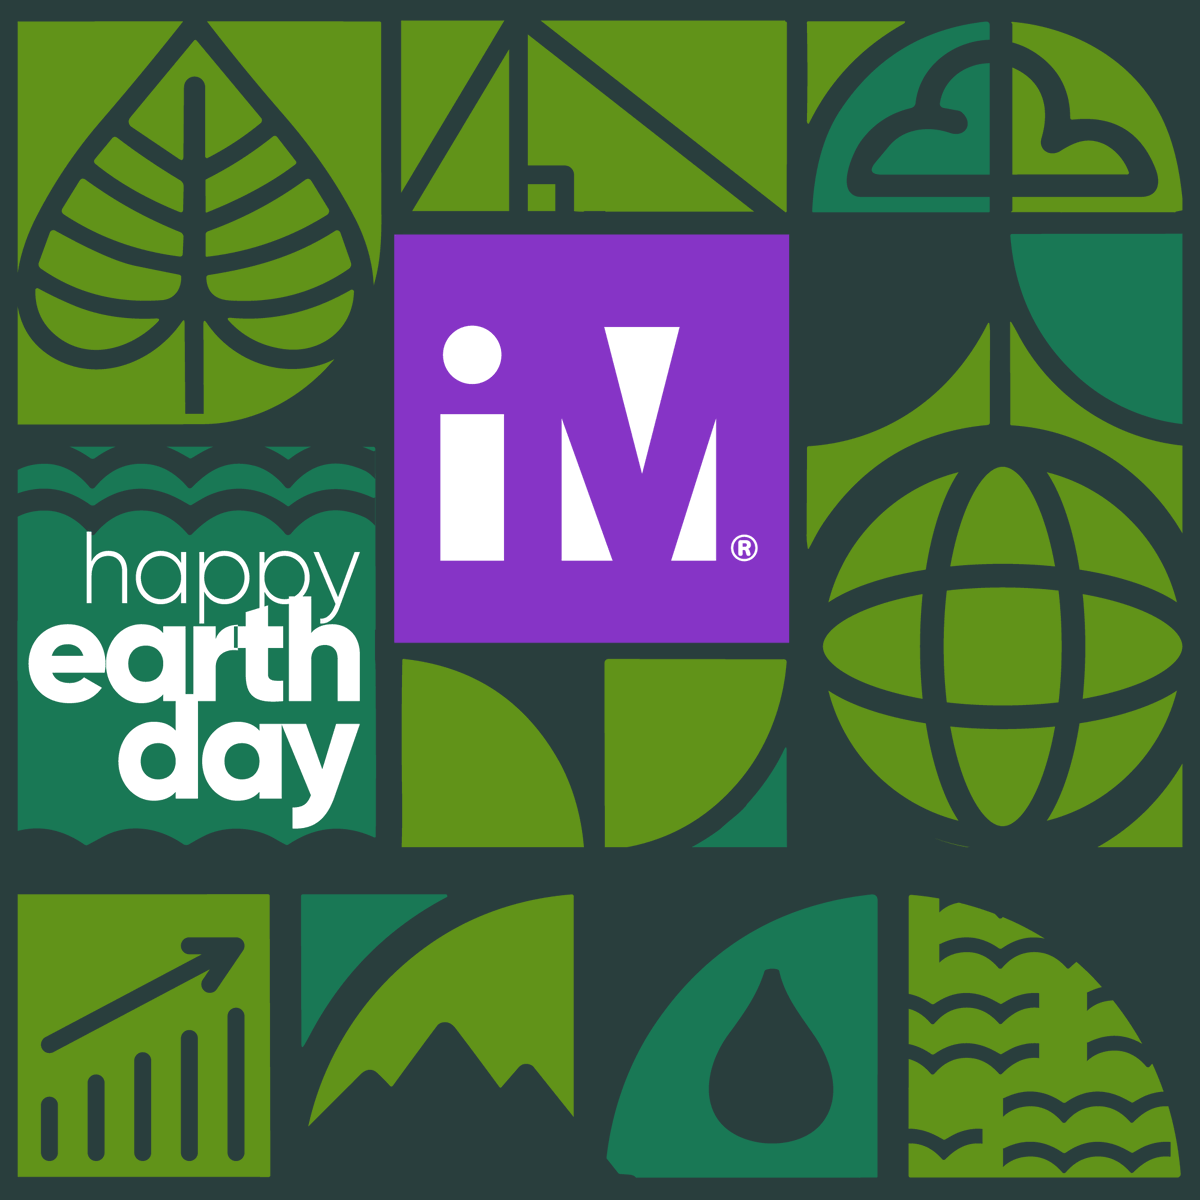 Happy Earth Day! Let's celebrate by exploring the intersection of math and our planet. With IM, students can see how math is used to understand the world around us and make a positive impact on the environment. FOLLOW US for more math & positivity! #LearnWithIM #EarthDay